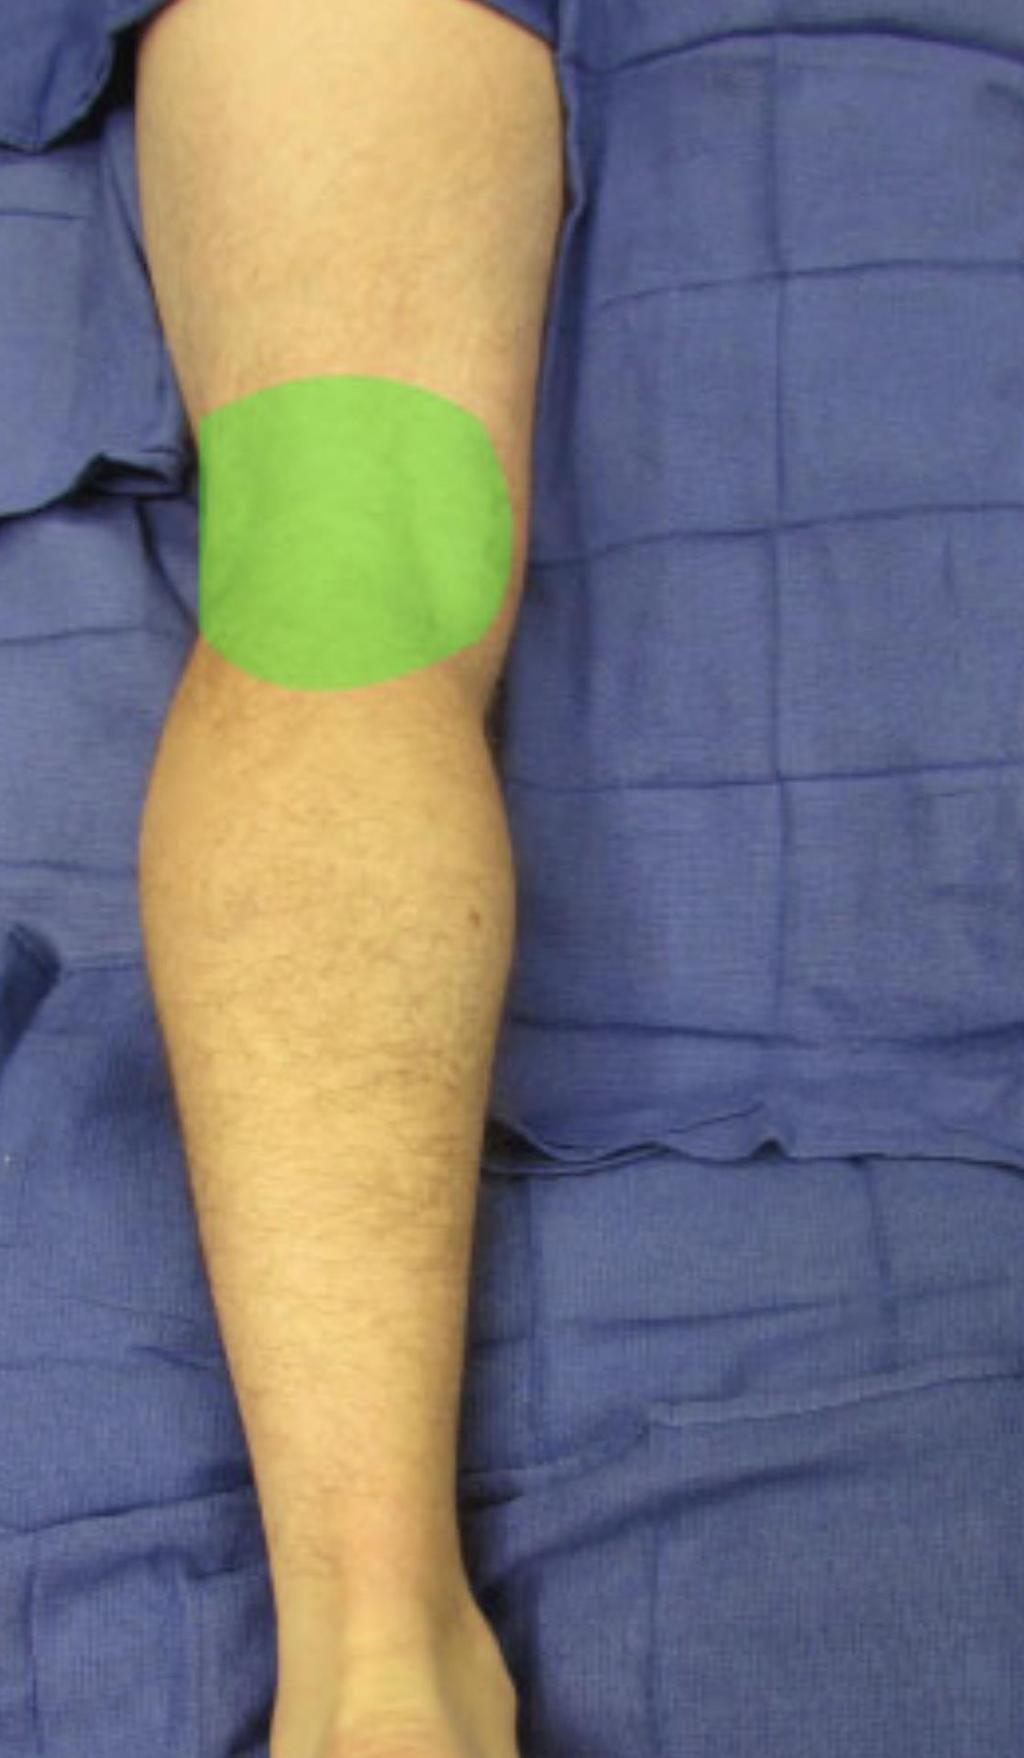 IPACK Injection between the Popliteal artery and the Capsule of